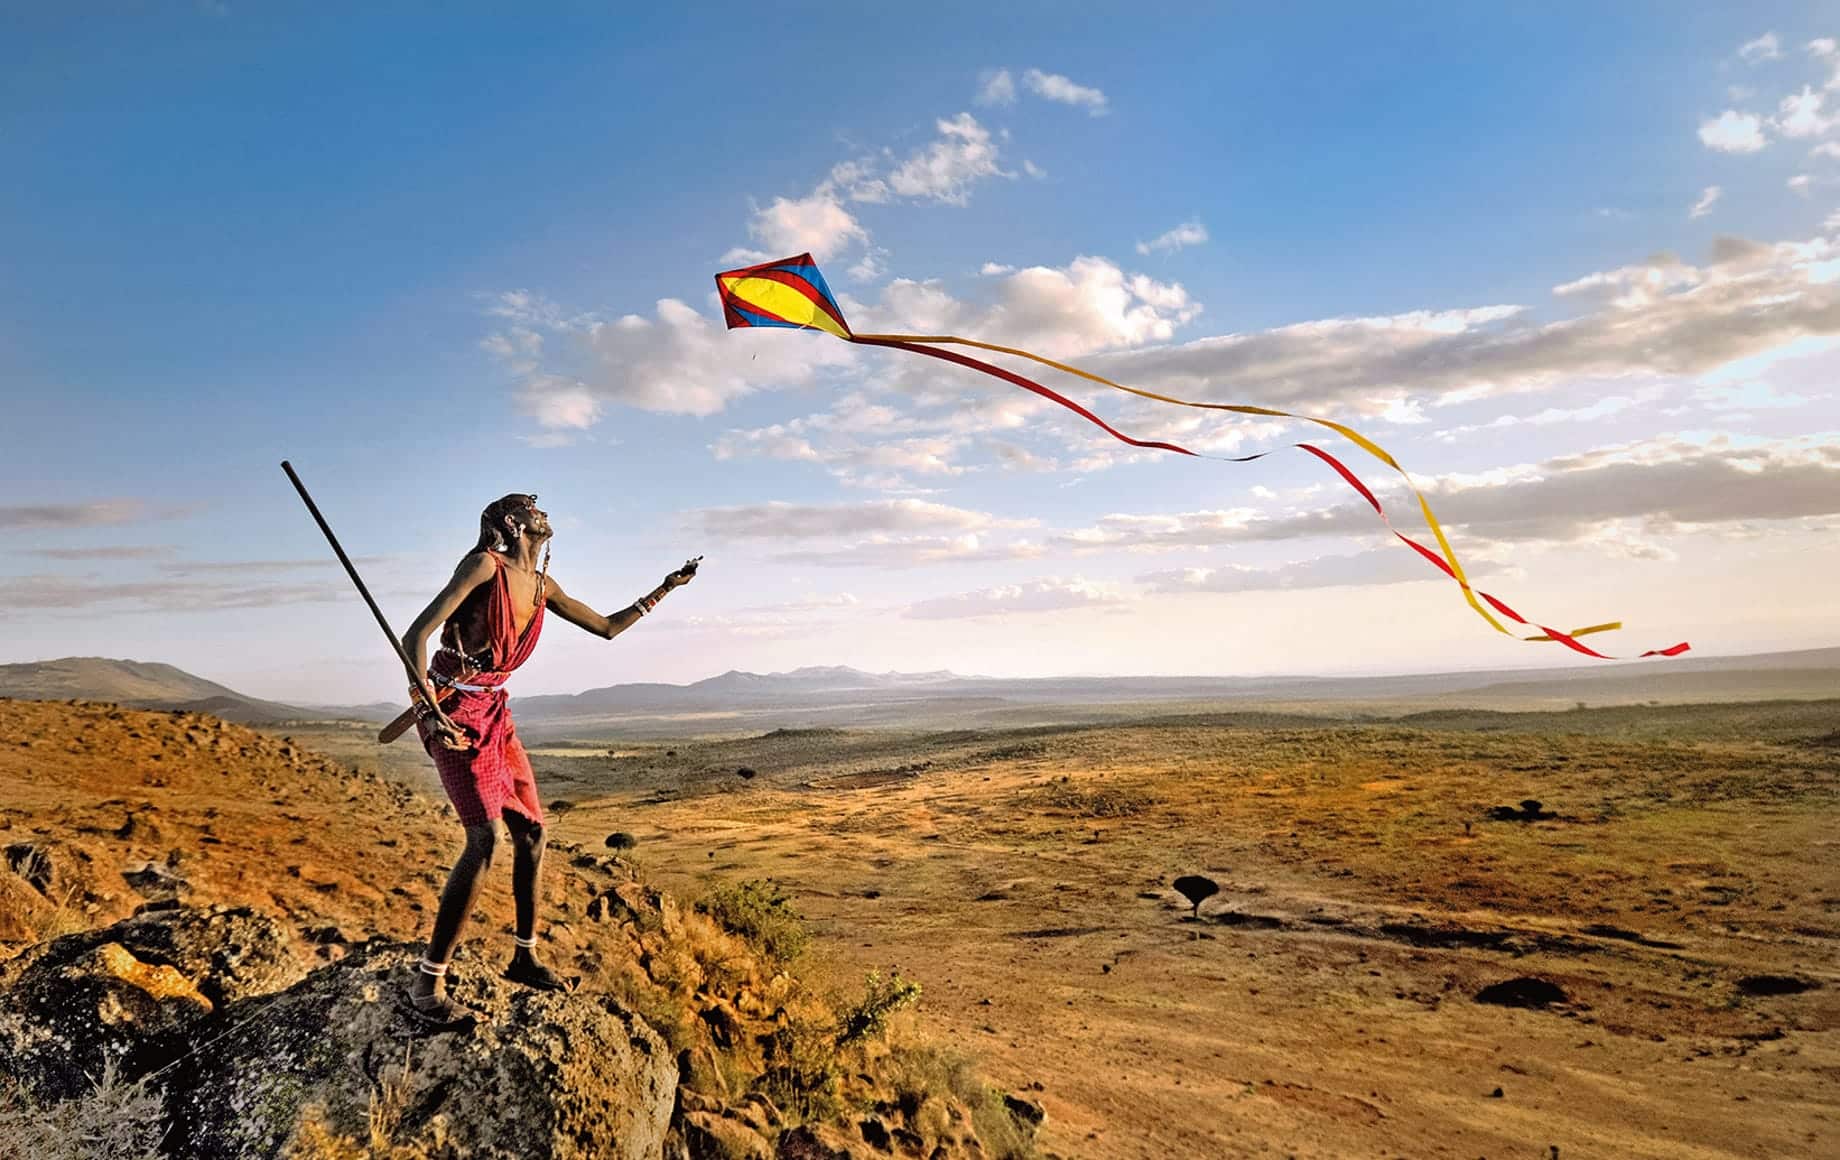 A Maasai warrior flies a kite over a valley with a beautiful landscape in background. Kenya, Africa.